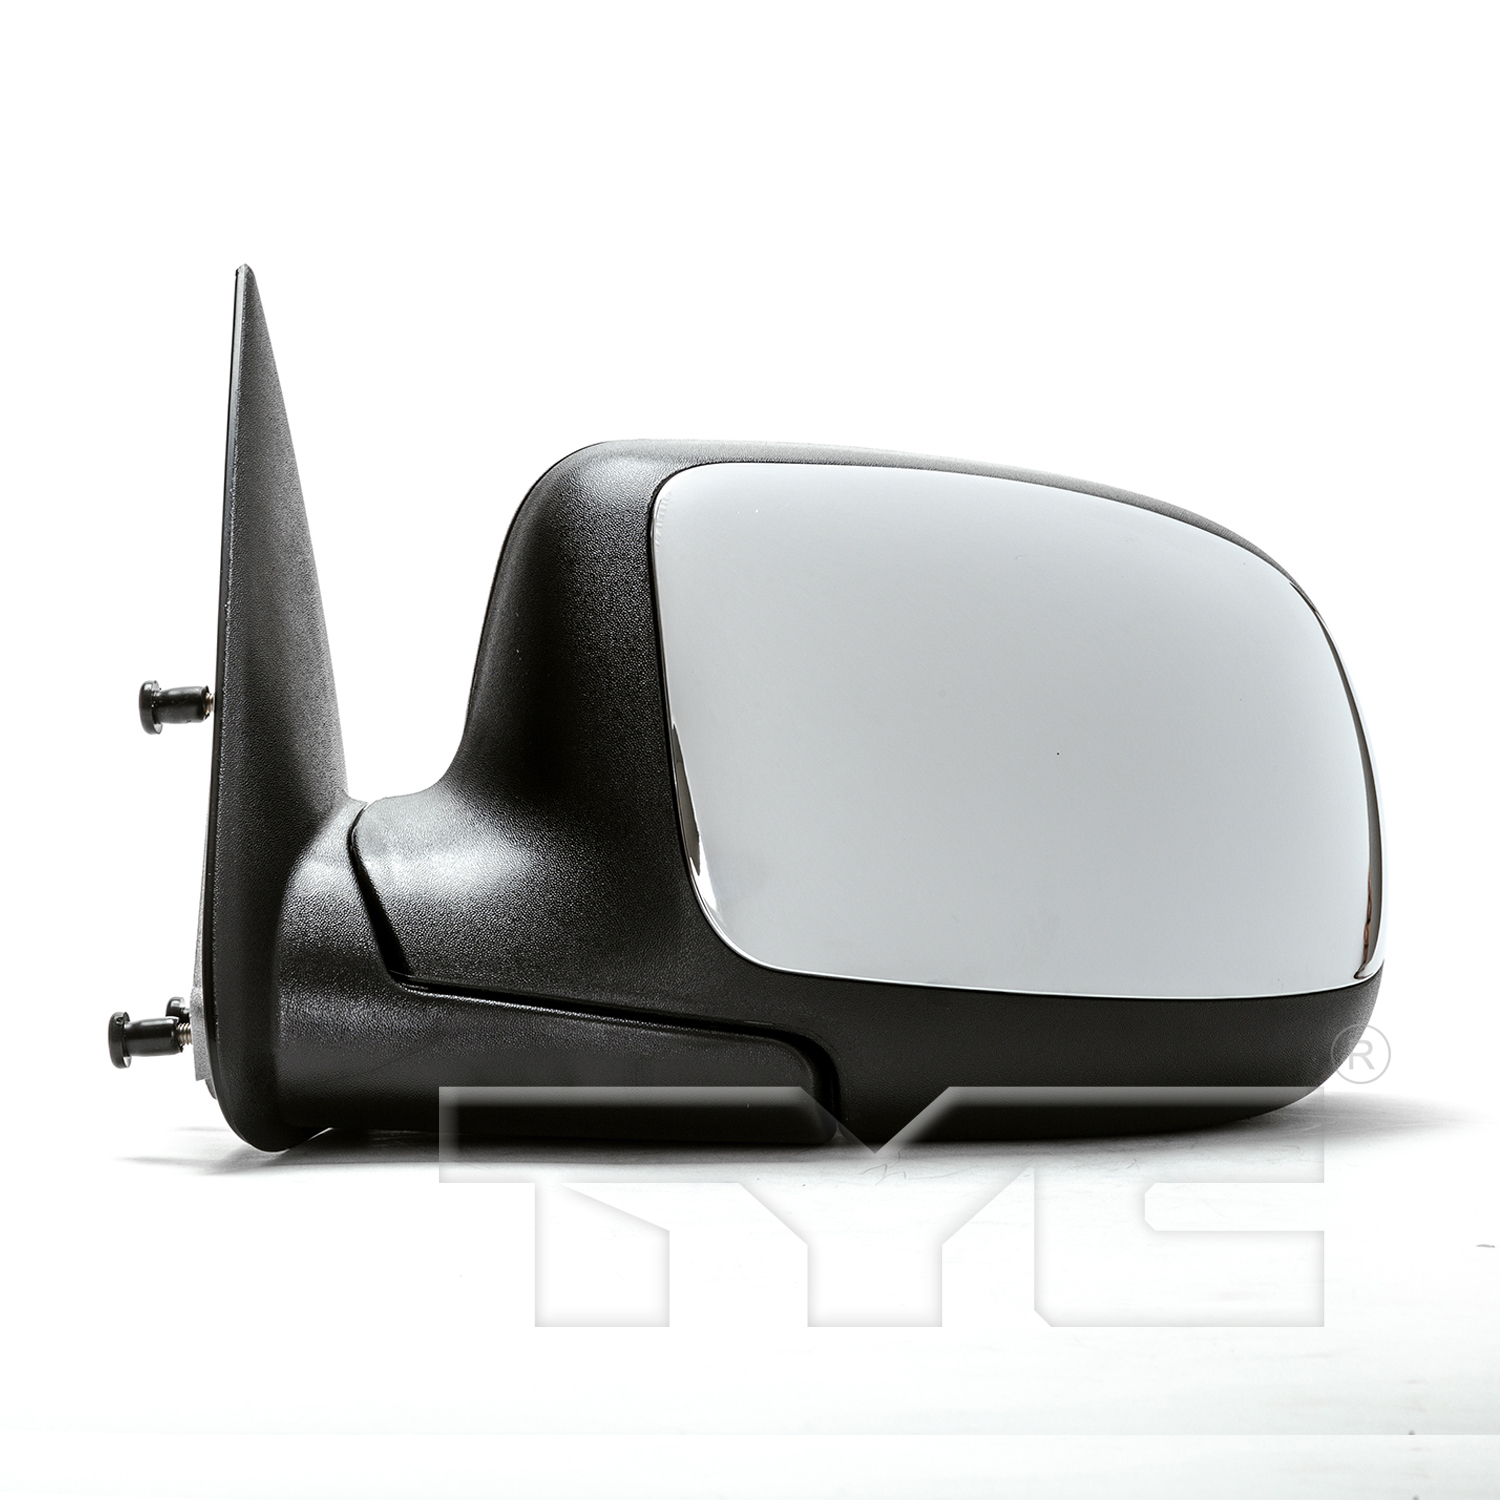 Aftermarket MIRRORS for CHEVROLET - SUBURBAN 1500, SUBURBAN 1500,00-05,LT Mirror outside rear view